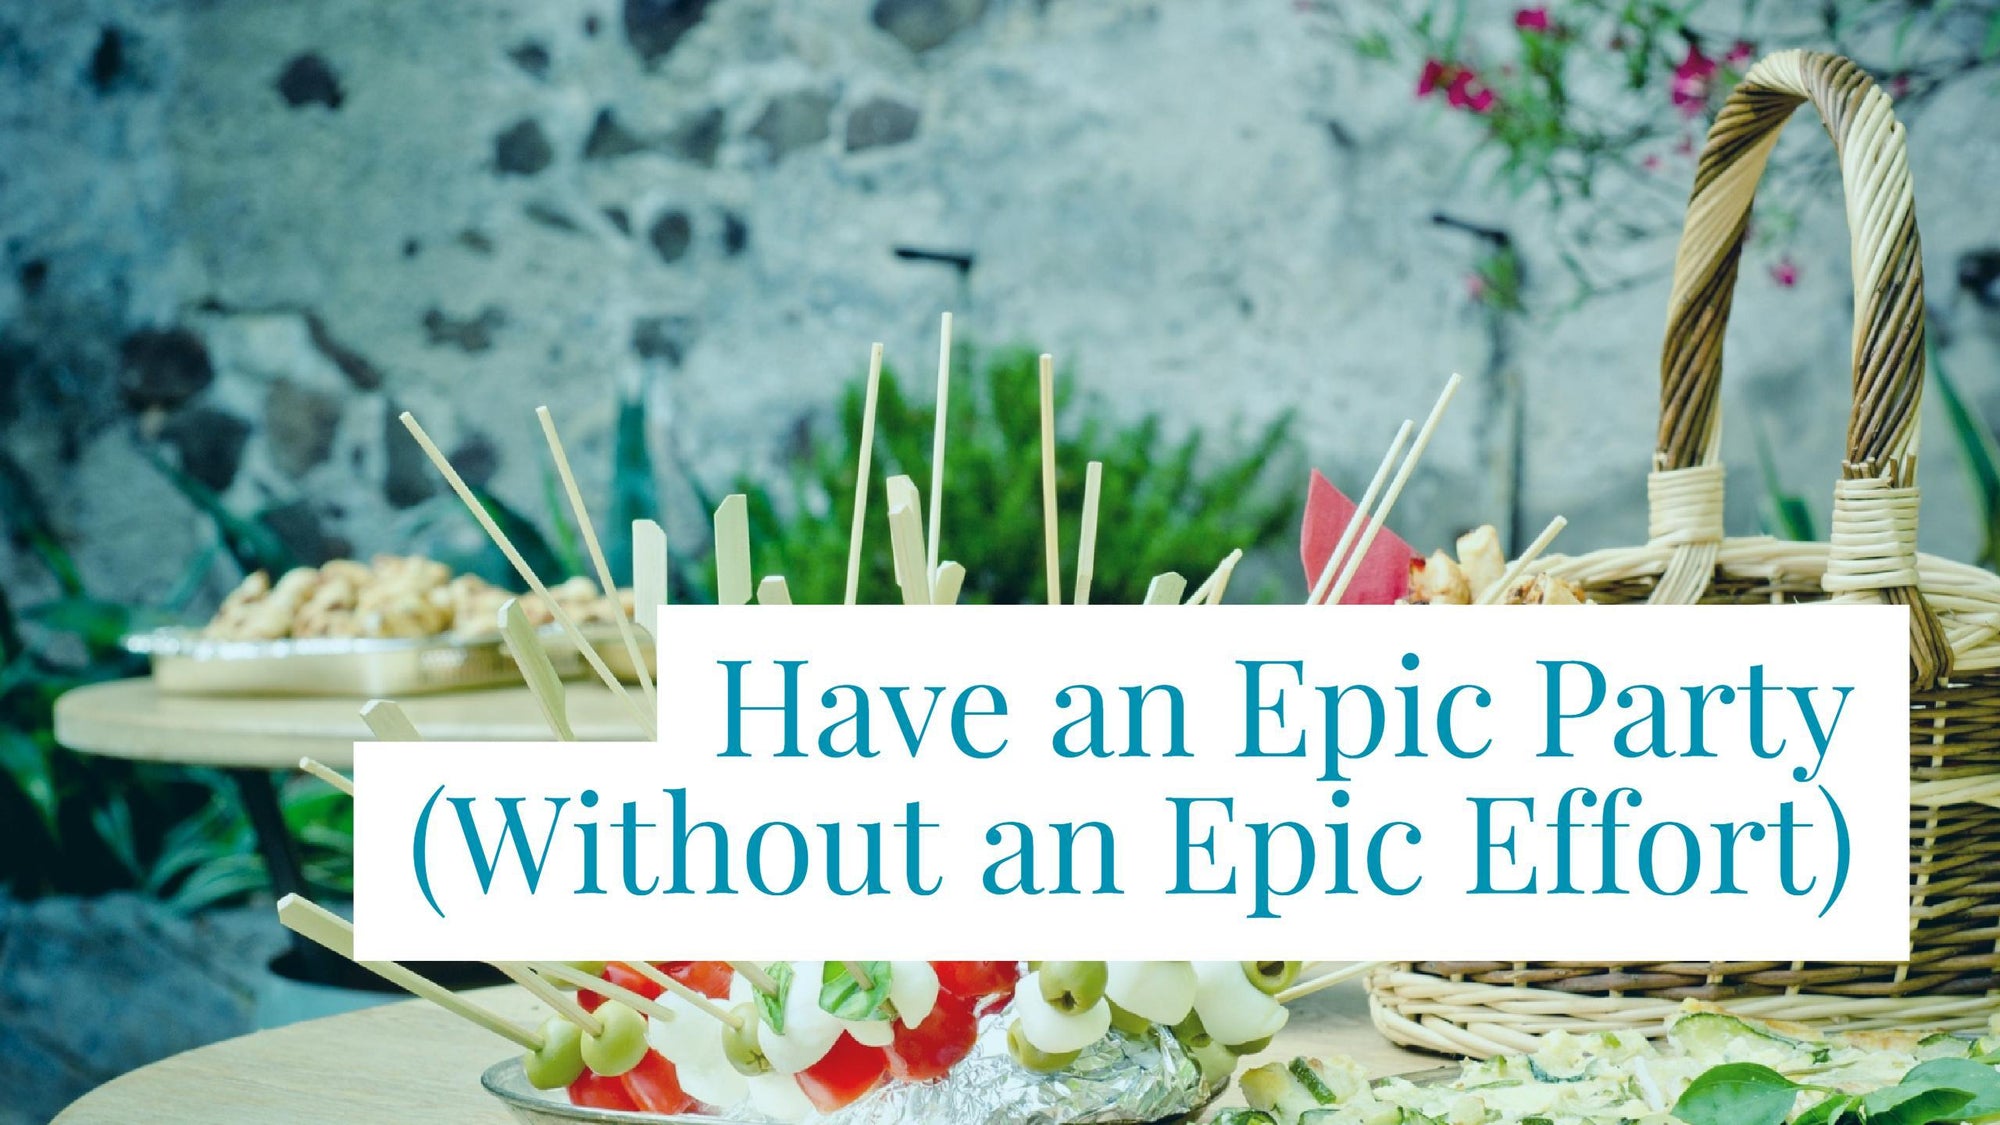 How to Host an Epic Party Without an Epic Effort